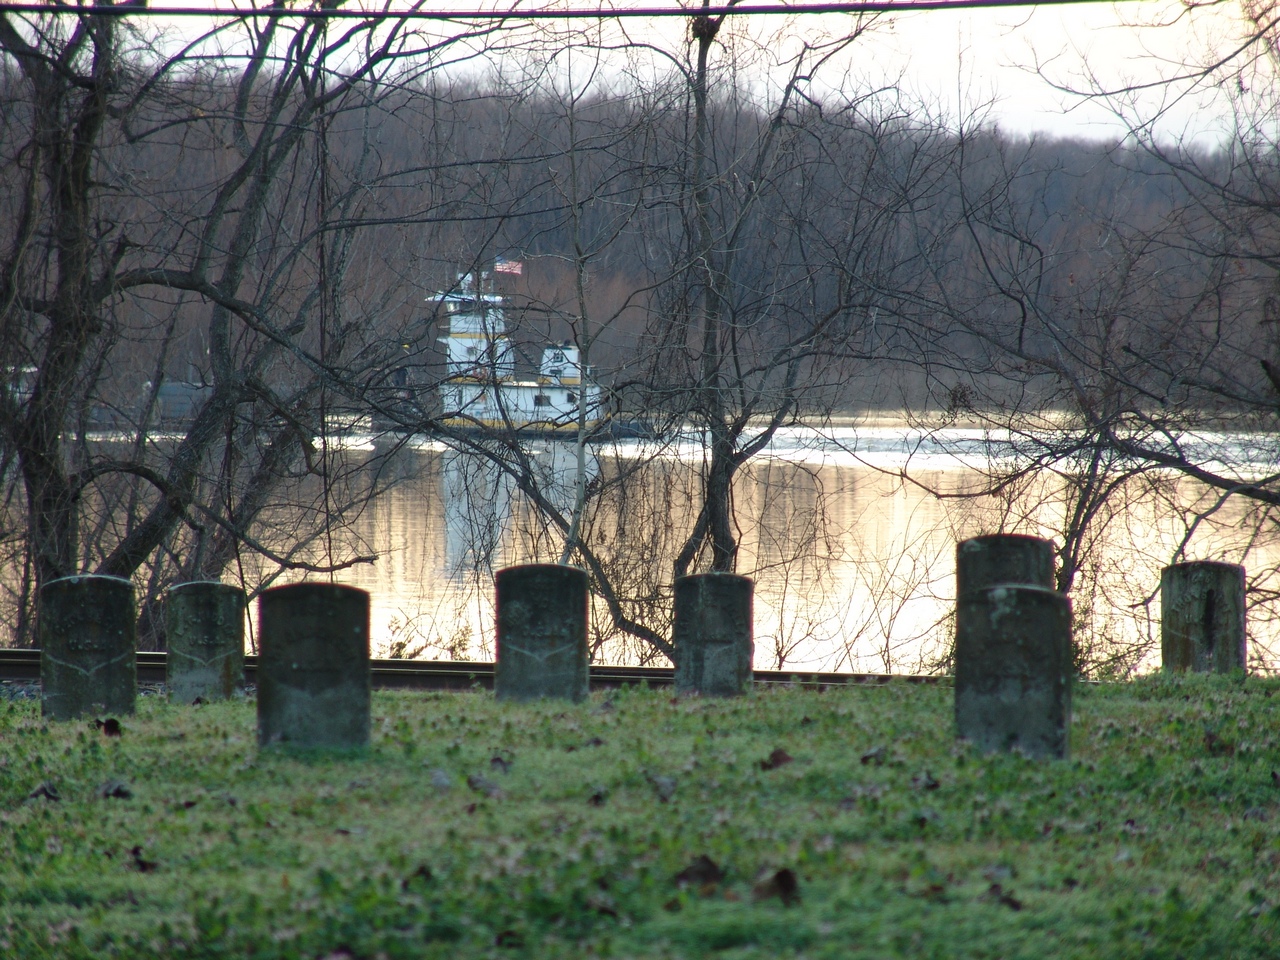 Towboat on Yazoo Diversion Canal seen from Vicksburg National Cemetery